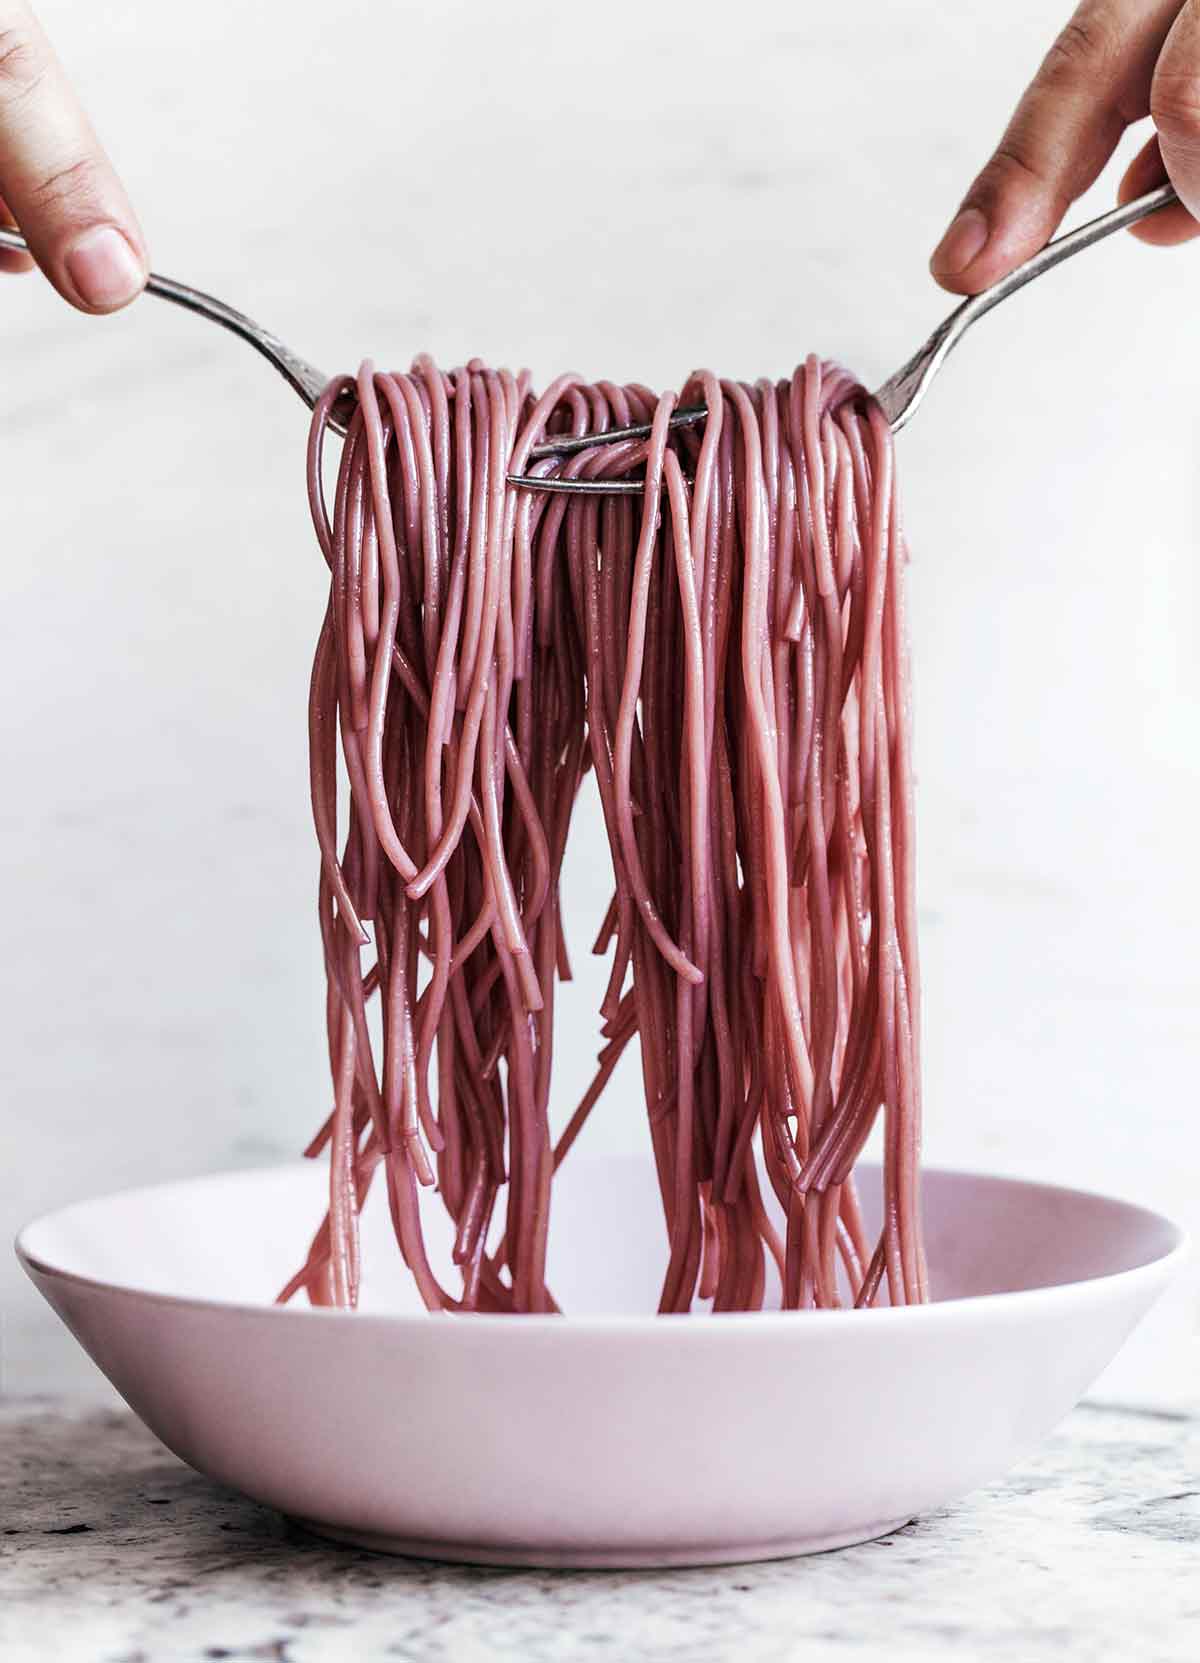 A person using two forks to lift strands of red wine spaghetti out of a white bowl.